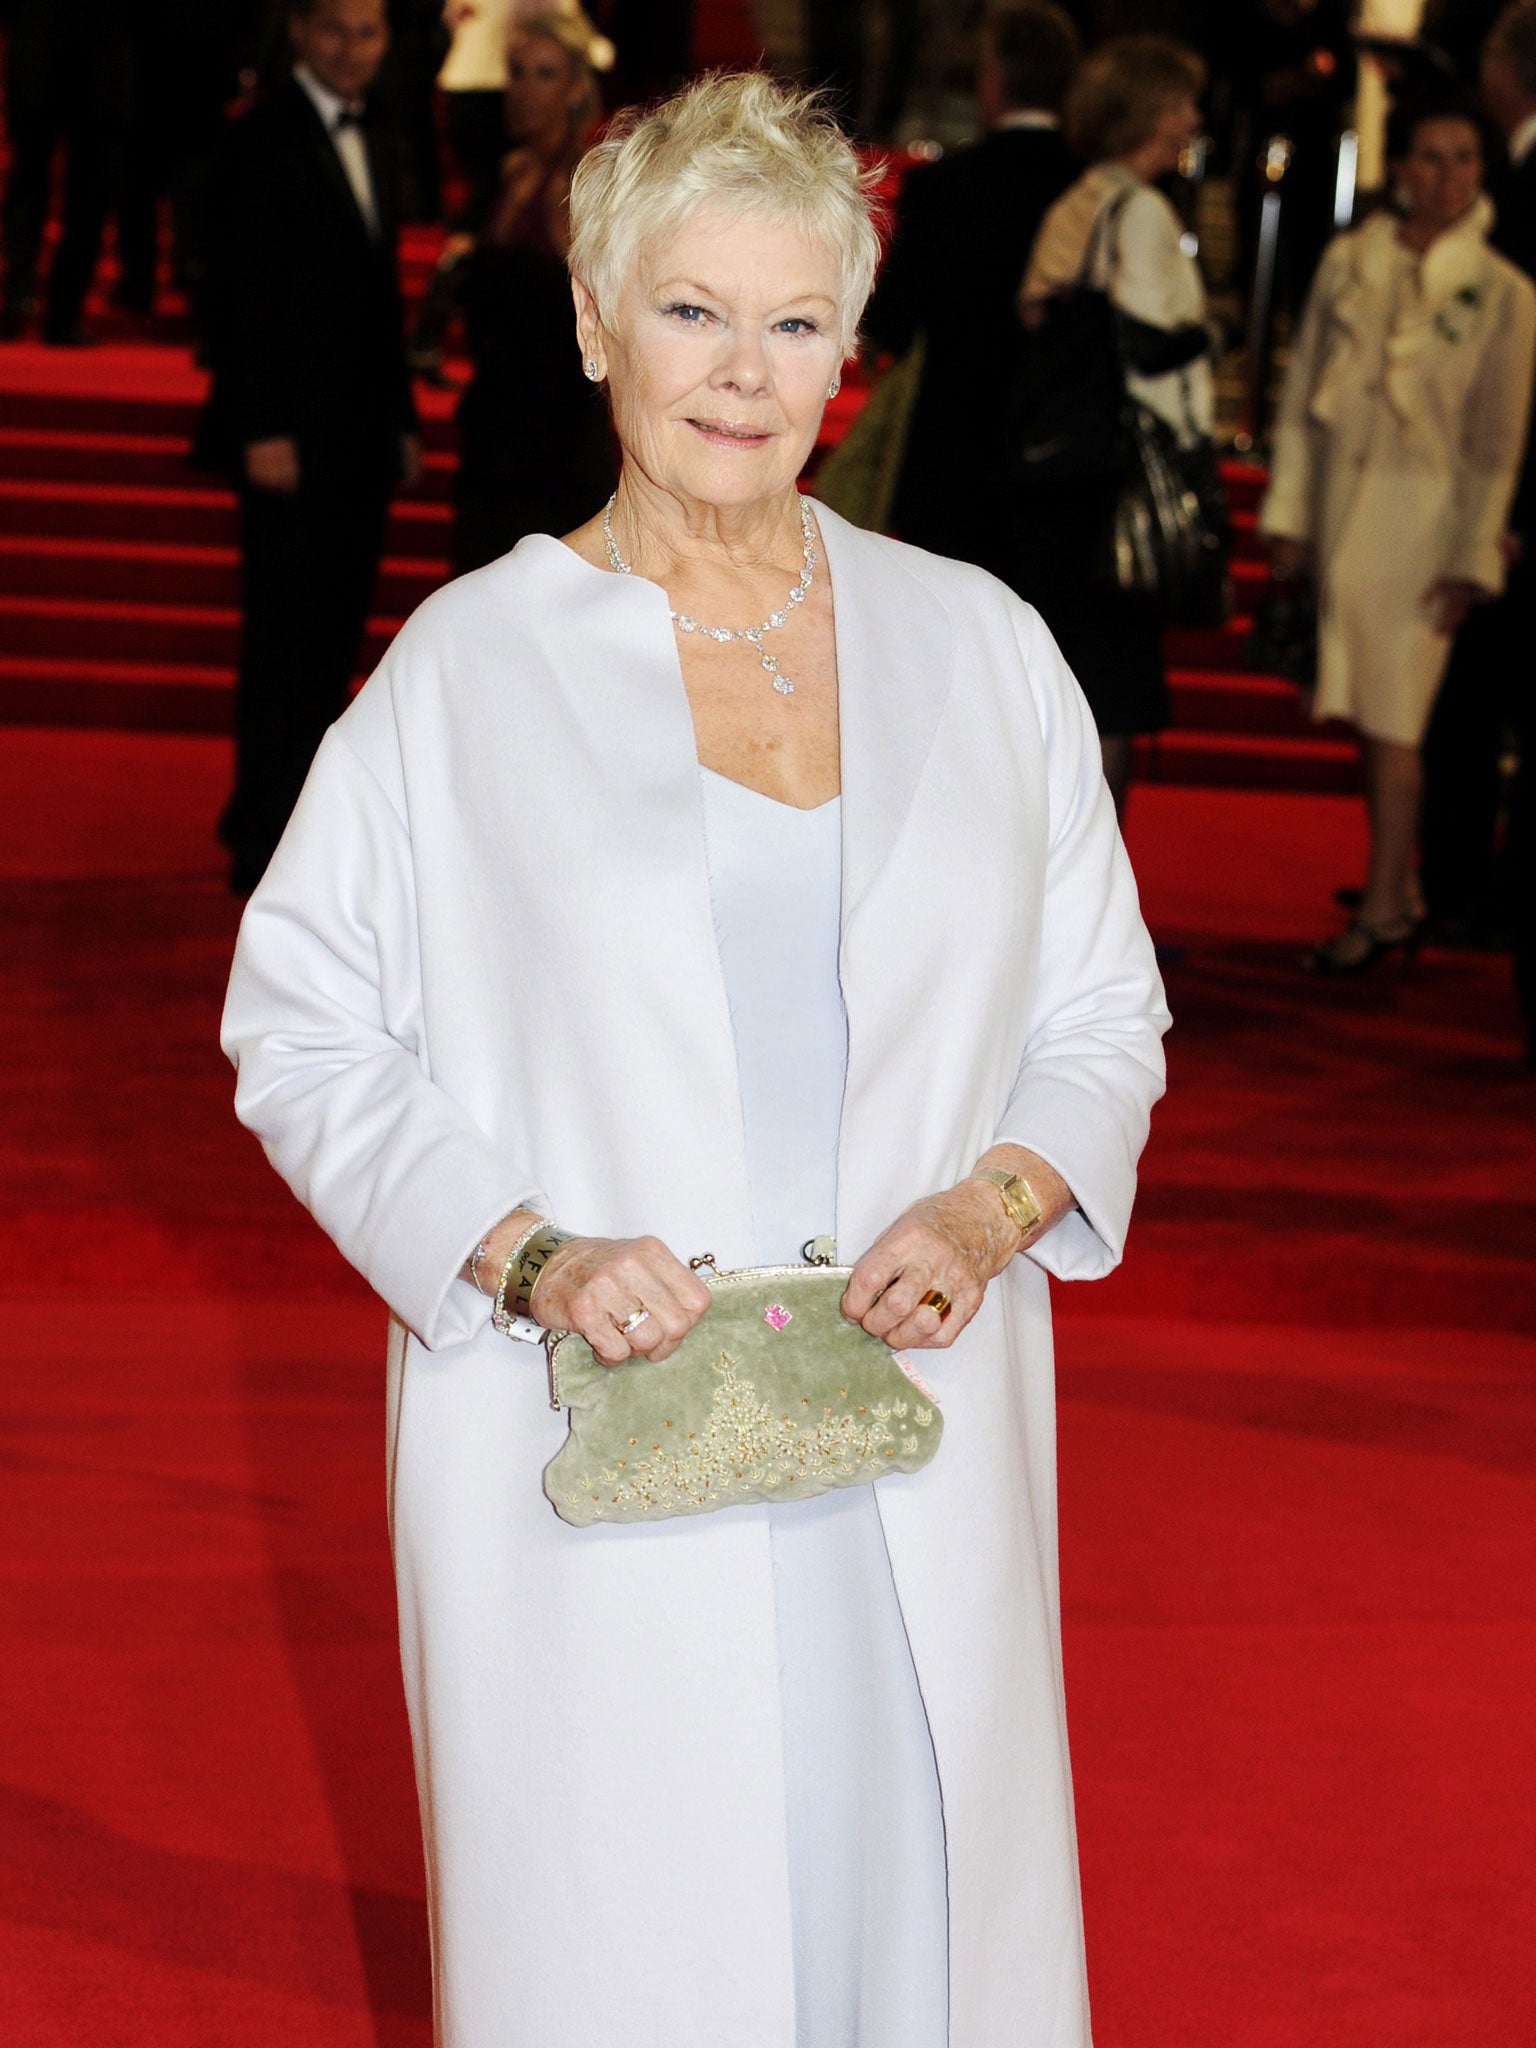 Dame Judi Dench’s stage debut was faintly praised